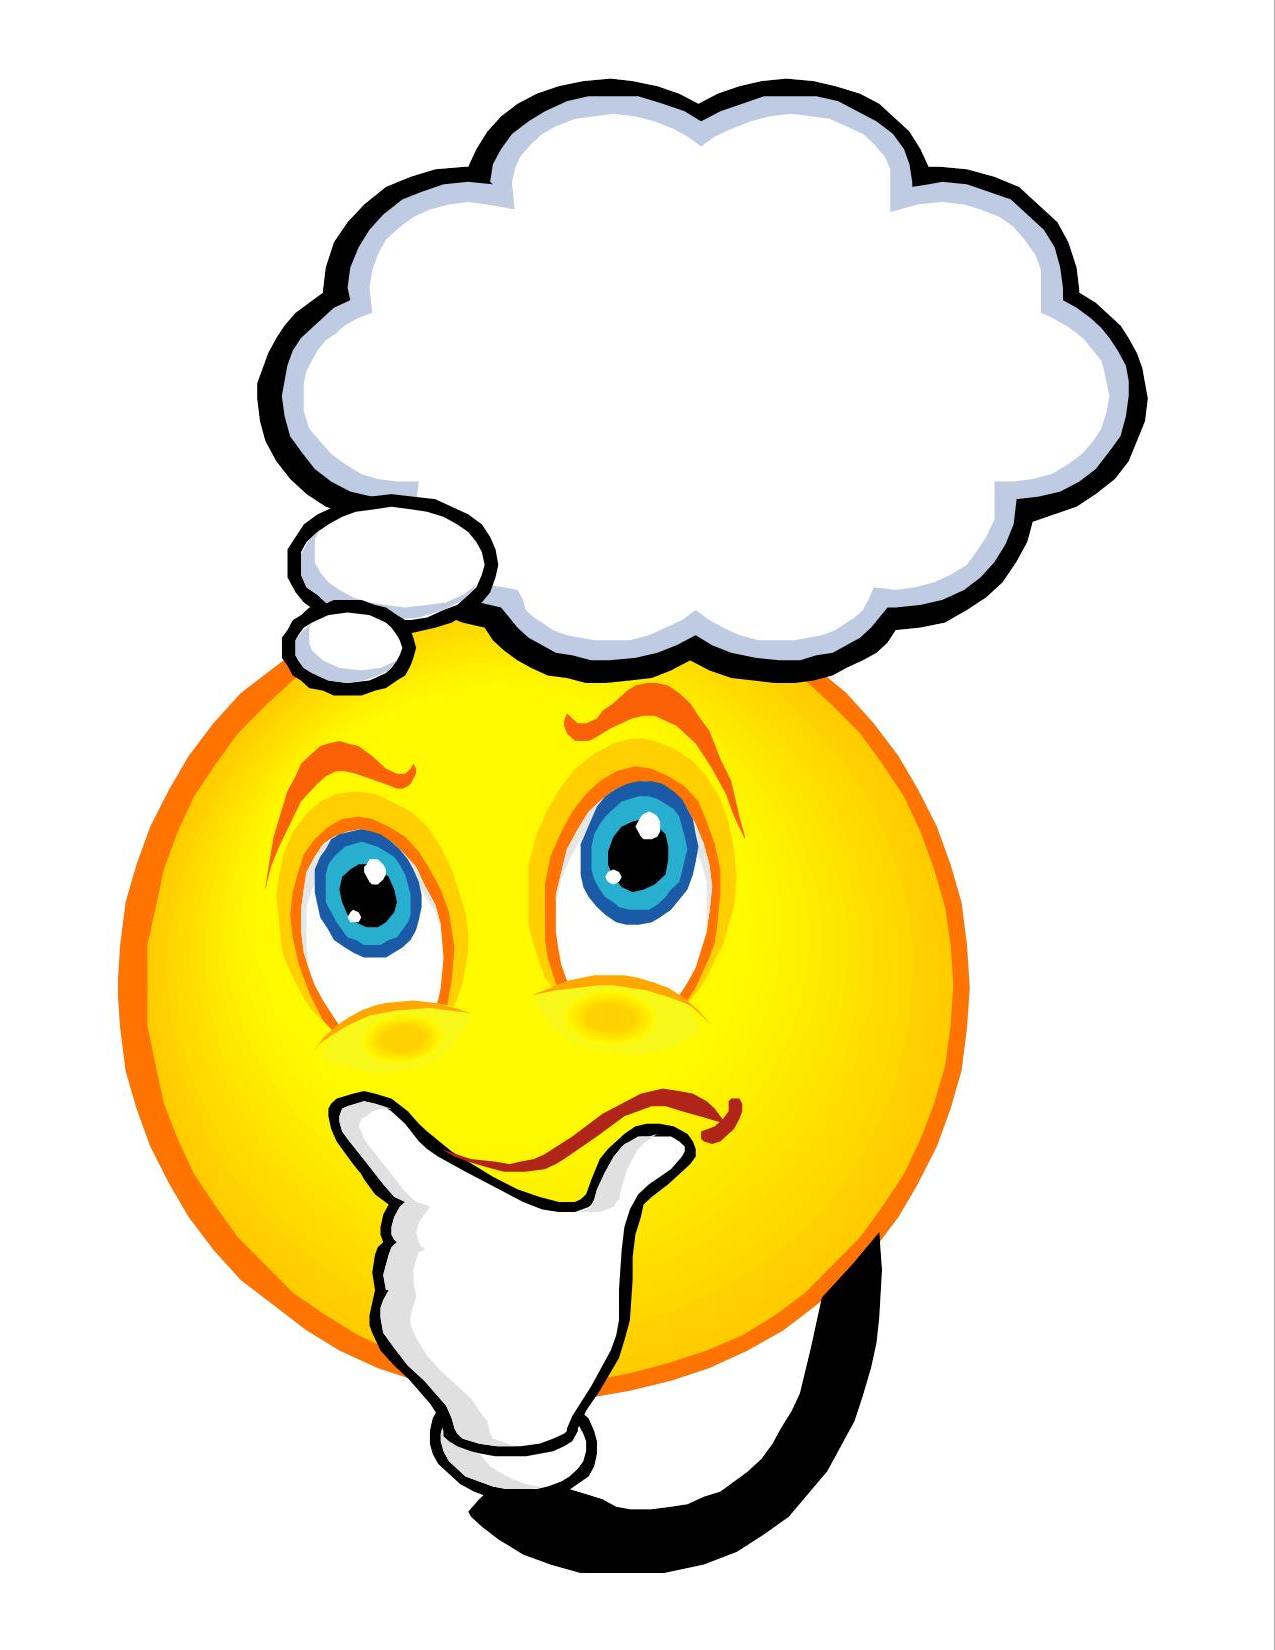 Thinking smiley clipart